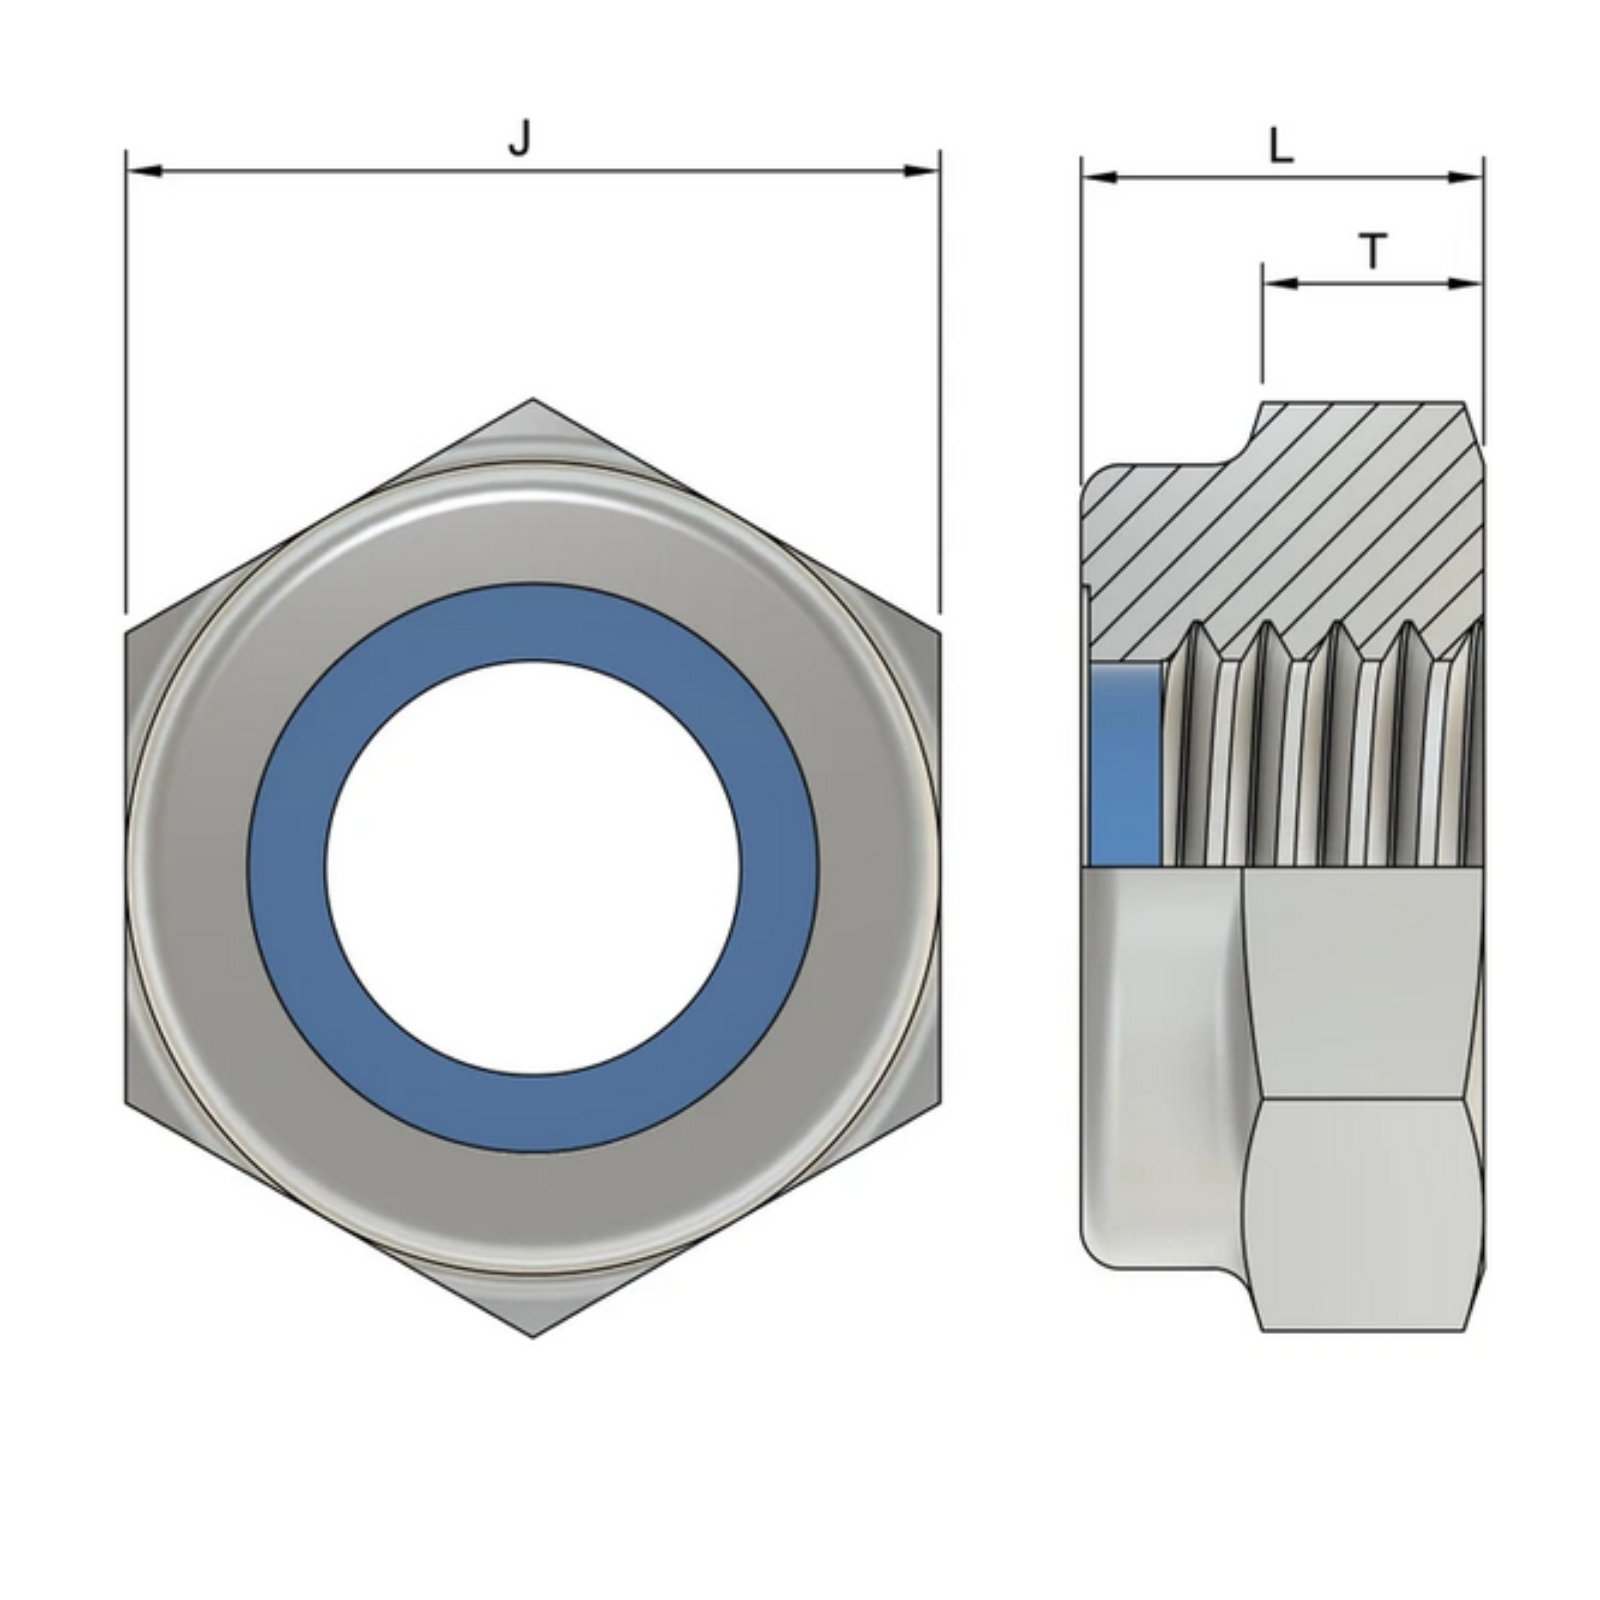 M6 Hexagon Nylon Locking Nuts (DIN 985) - Stainless Steel (A2)